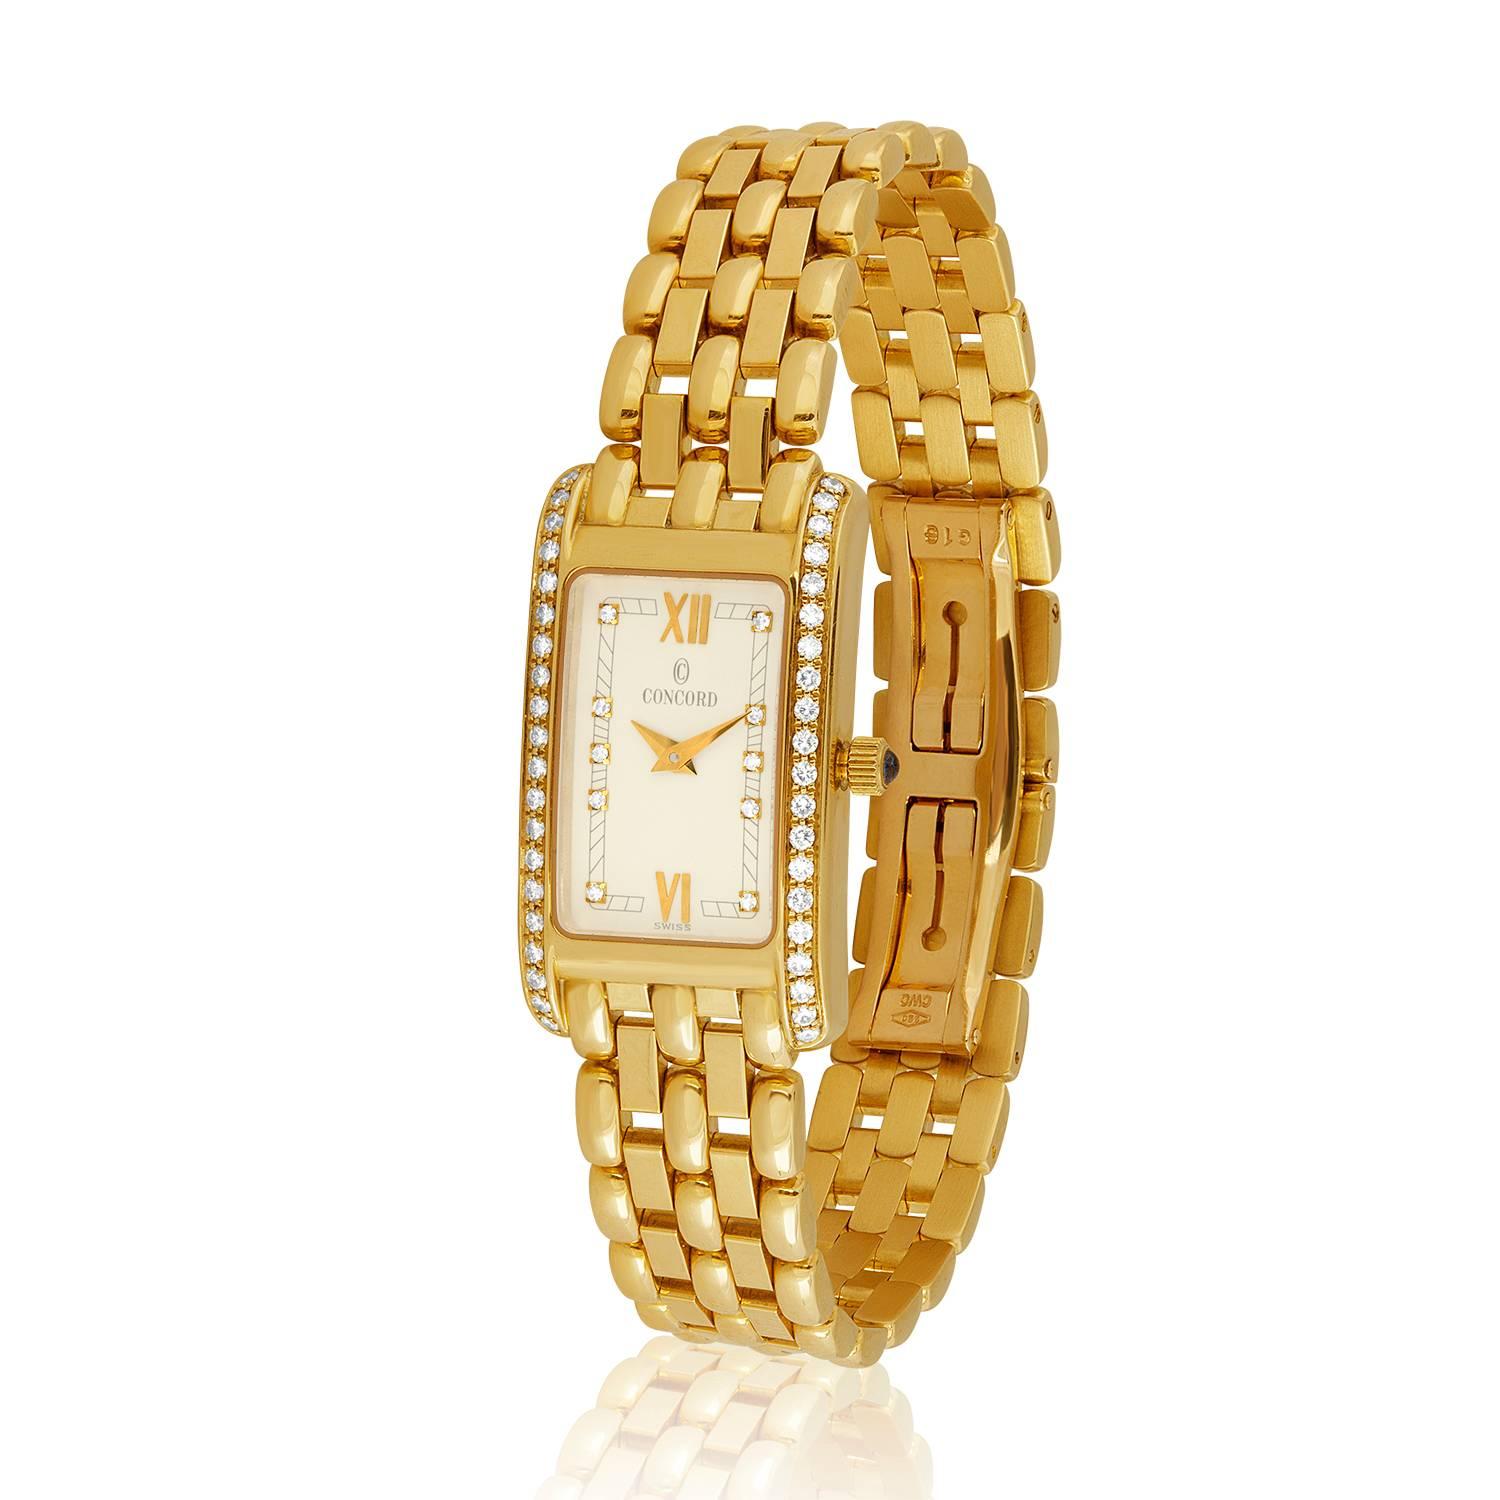 Lady's Concord Veneto 18K Yellow Gold Swiss Quartz Movement Watch
The watch is water resistant.
The numbers on the back 51-25-670 and 1002411
Blue Sapphire Cabochon on Crown.
There are diamonds on the face E VVS 0.50ct.
The face is 5/8